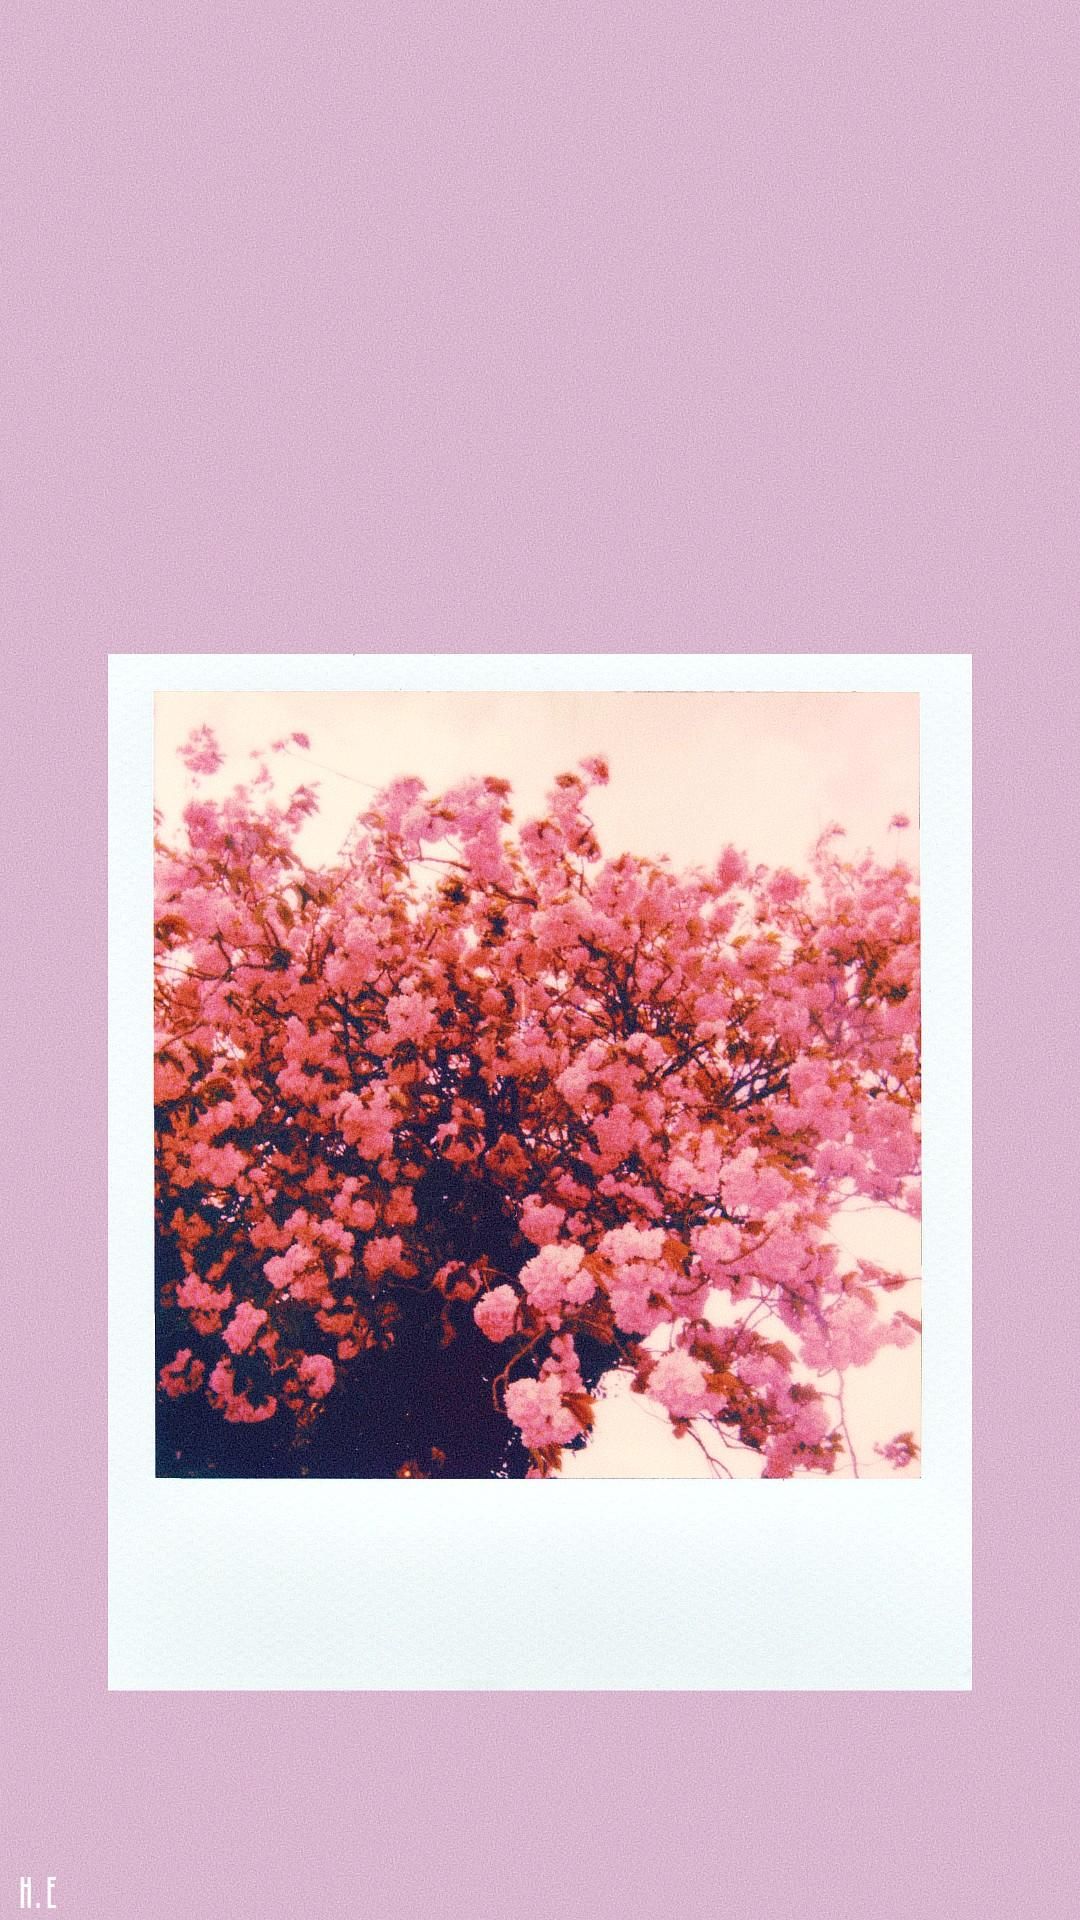 Aesthetic pink phone wallpaper with a polaroid picture of a pink flowered tree - Polaroid